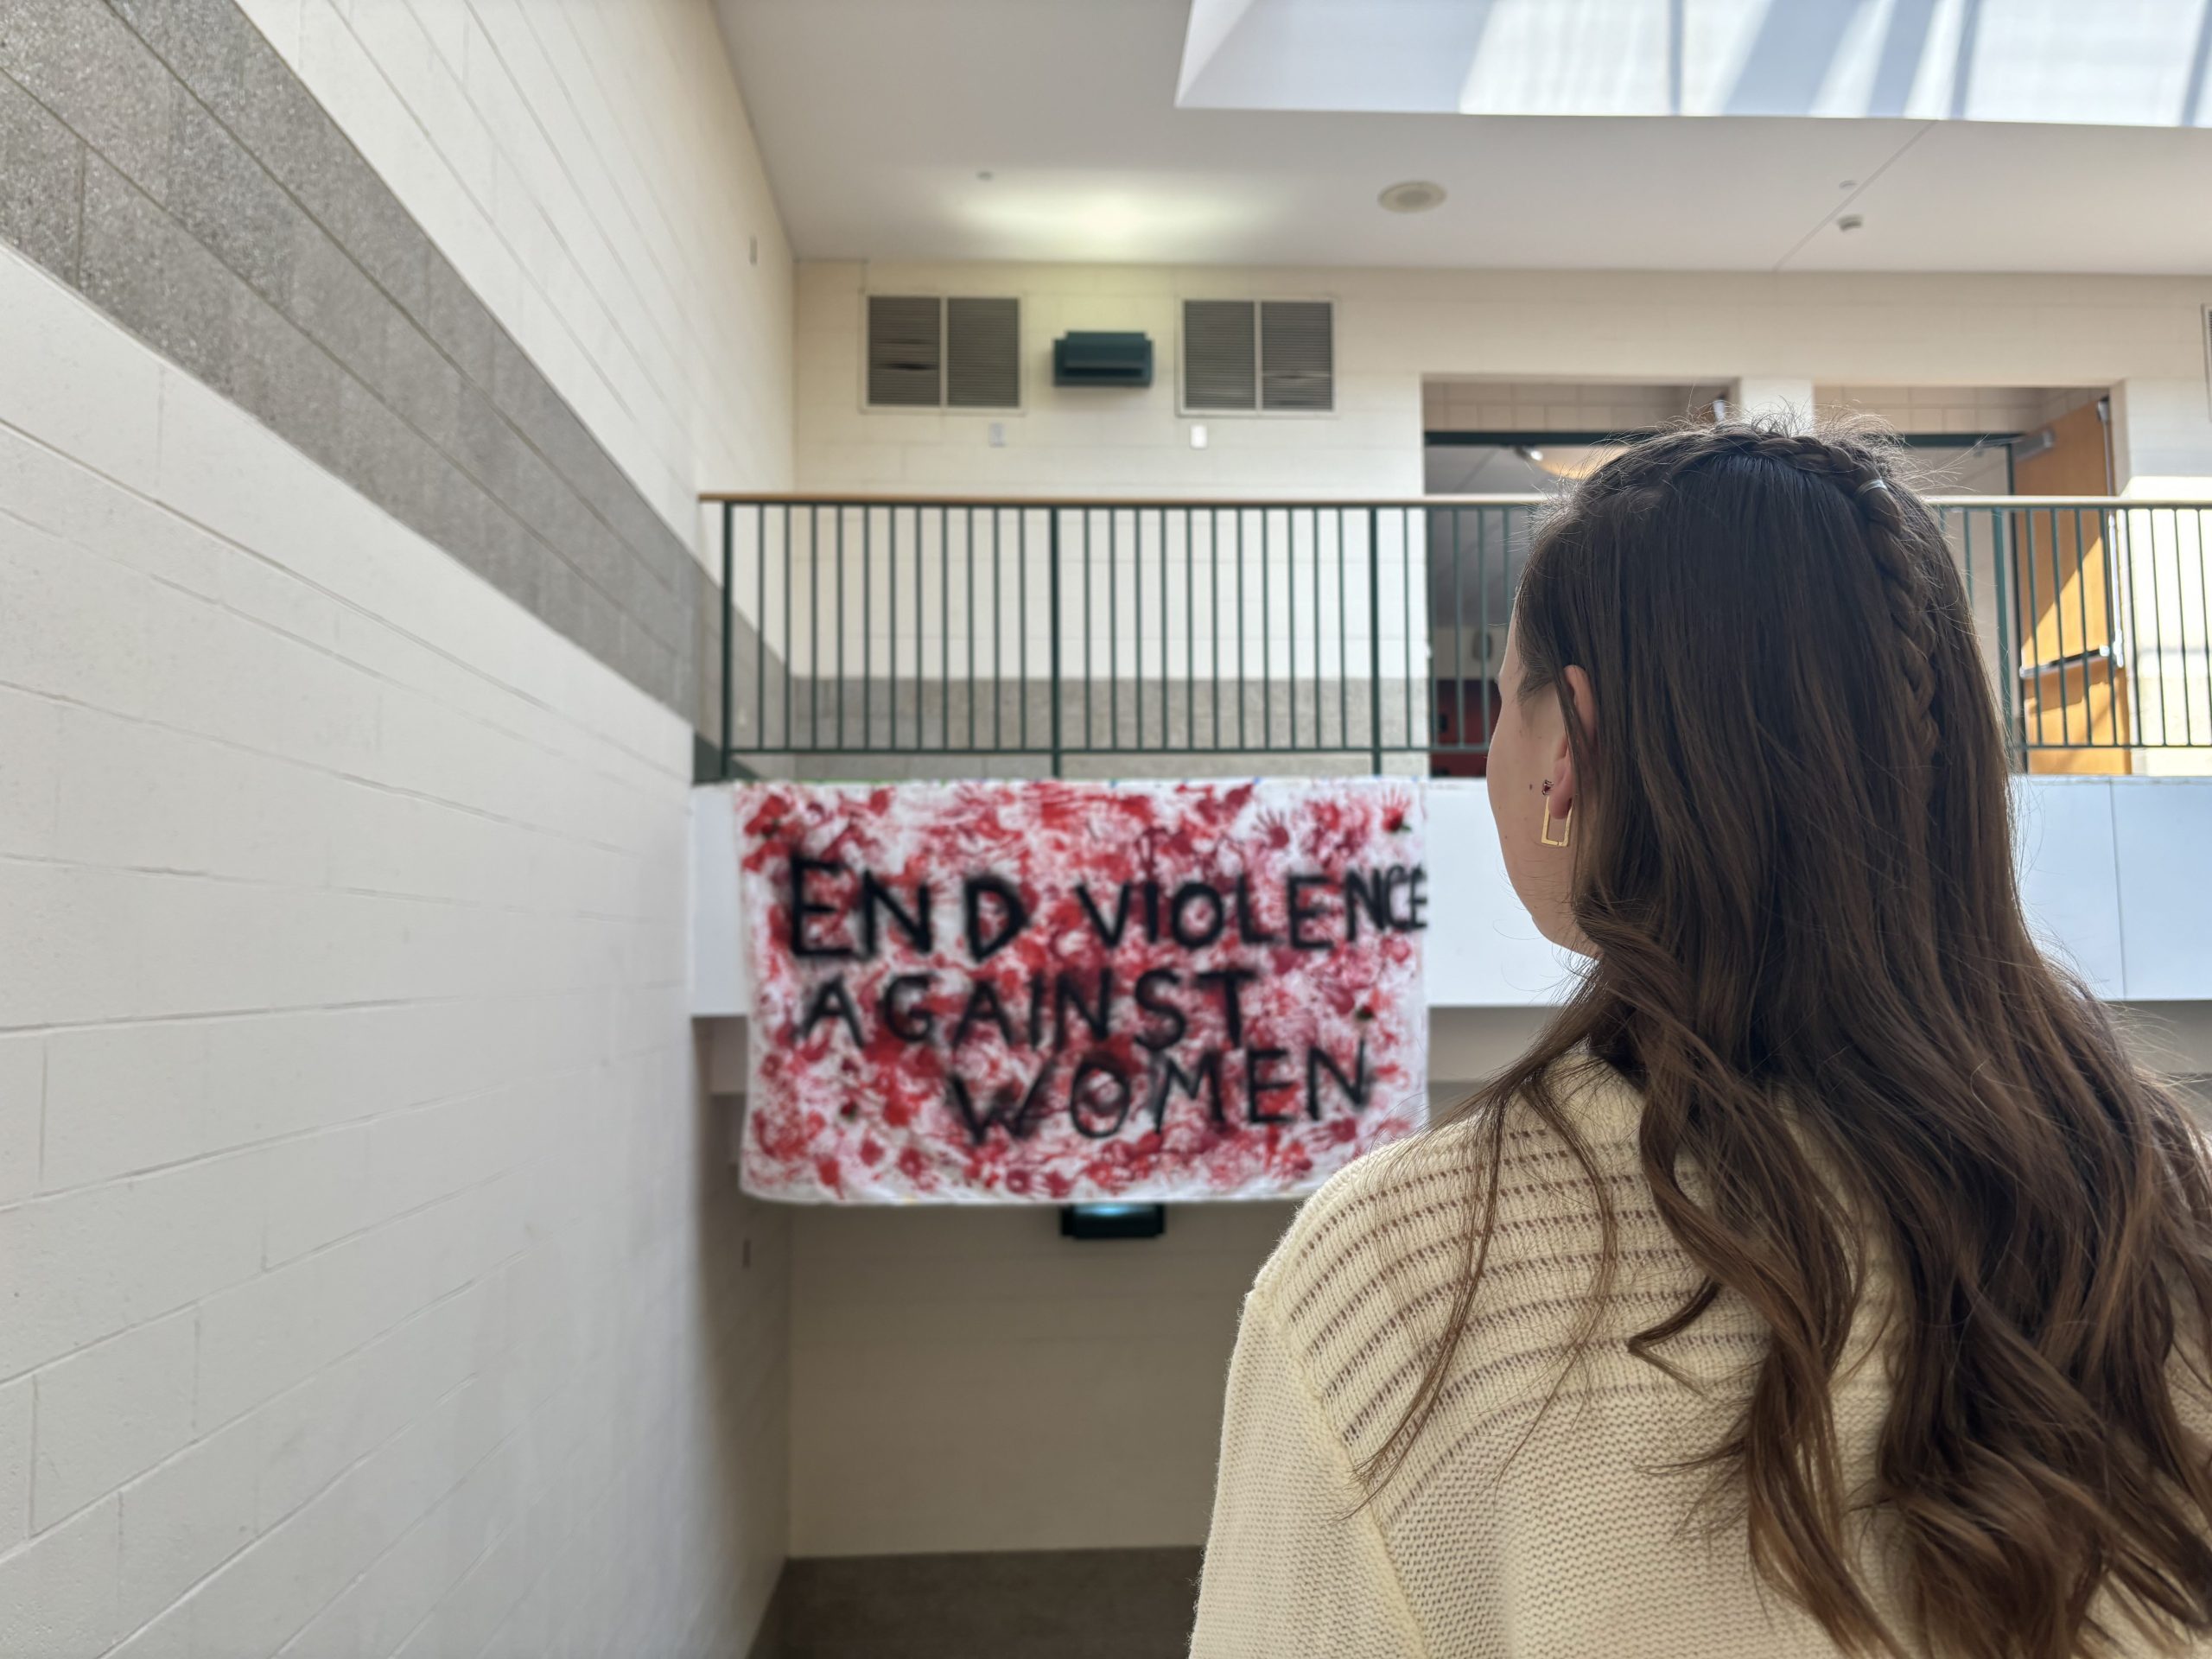 A student looks ahead at the large display, promoting an end to violence against women on Valentines Day